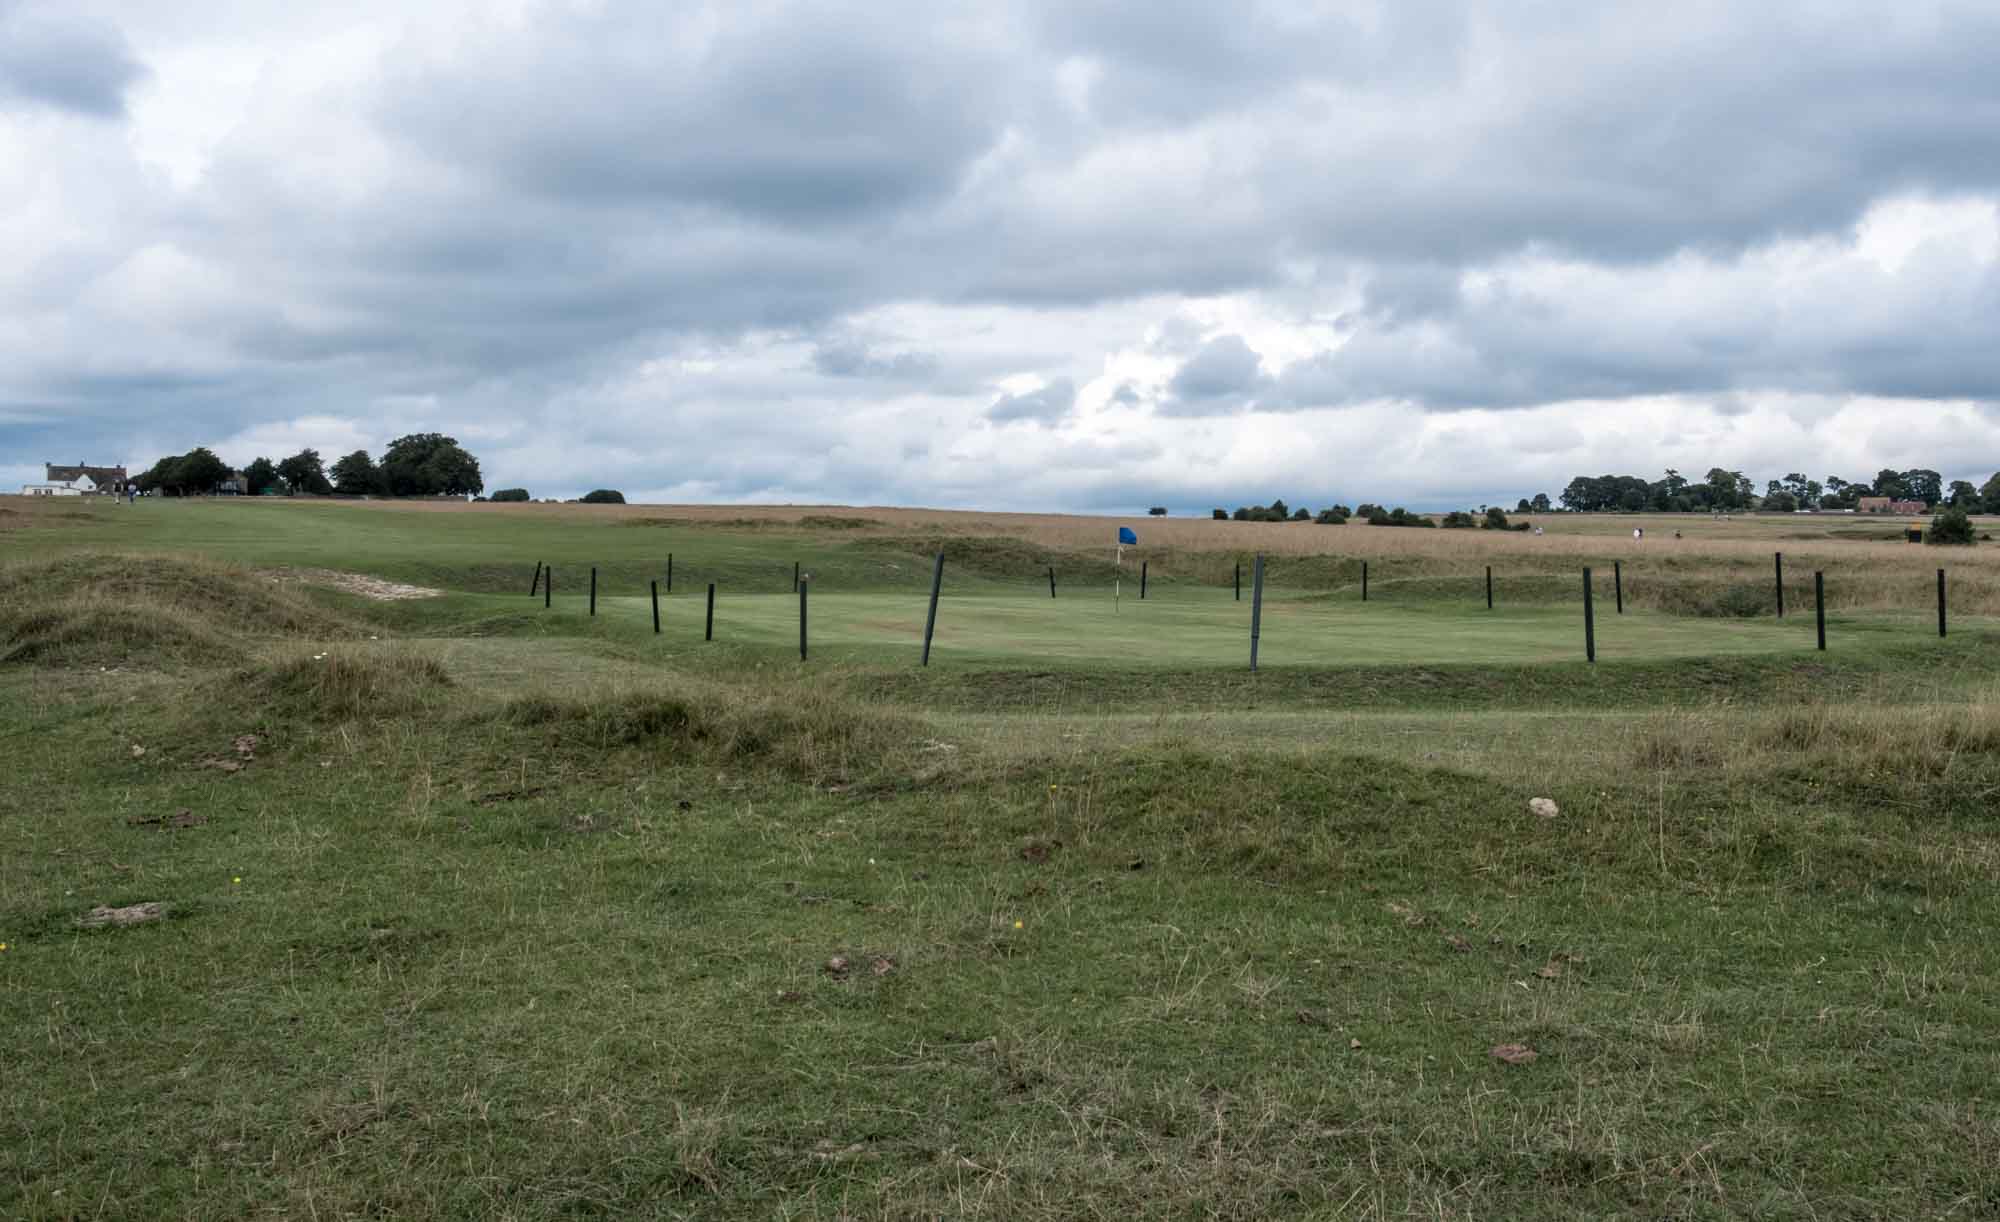 Golf the way it was meant to be at Minchinhampton Old Golf Course.